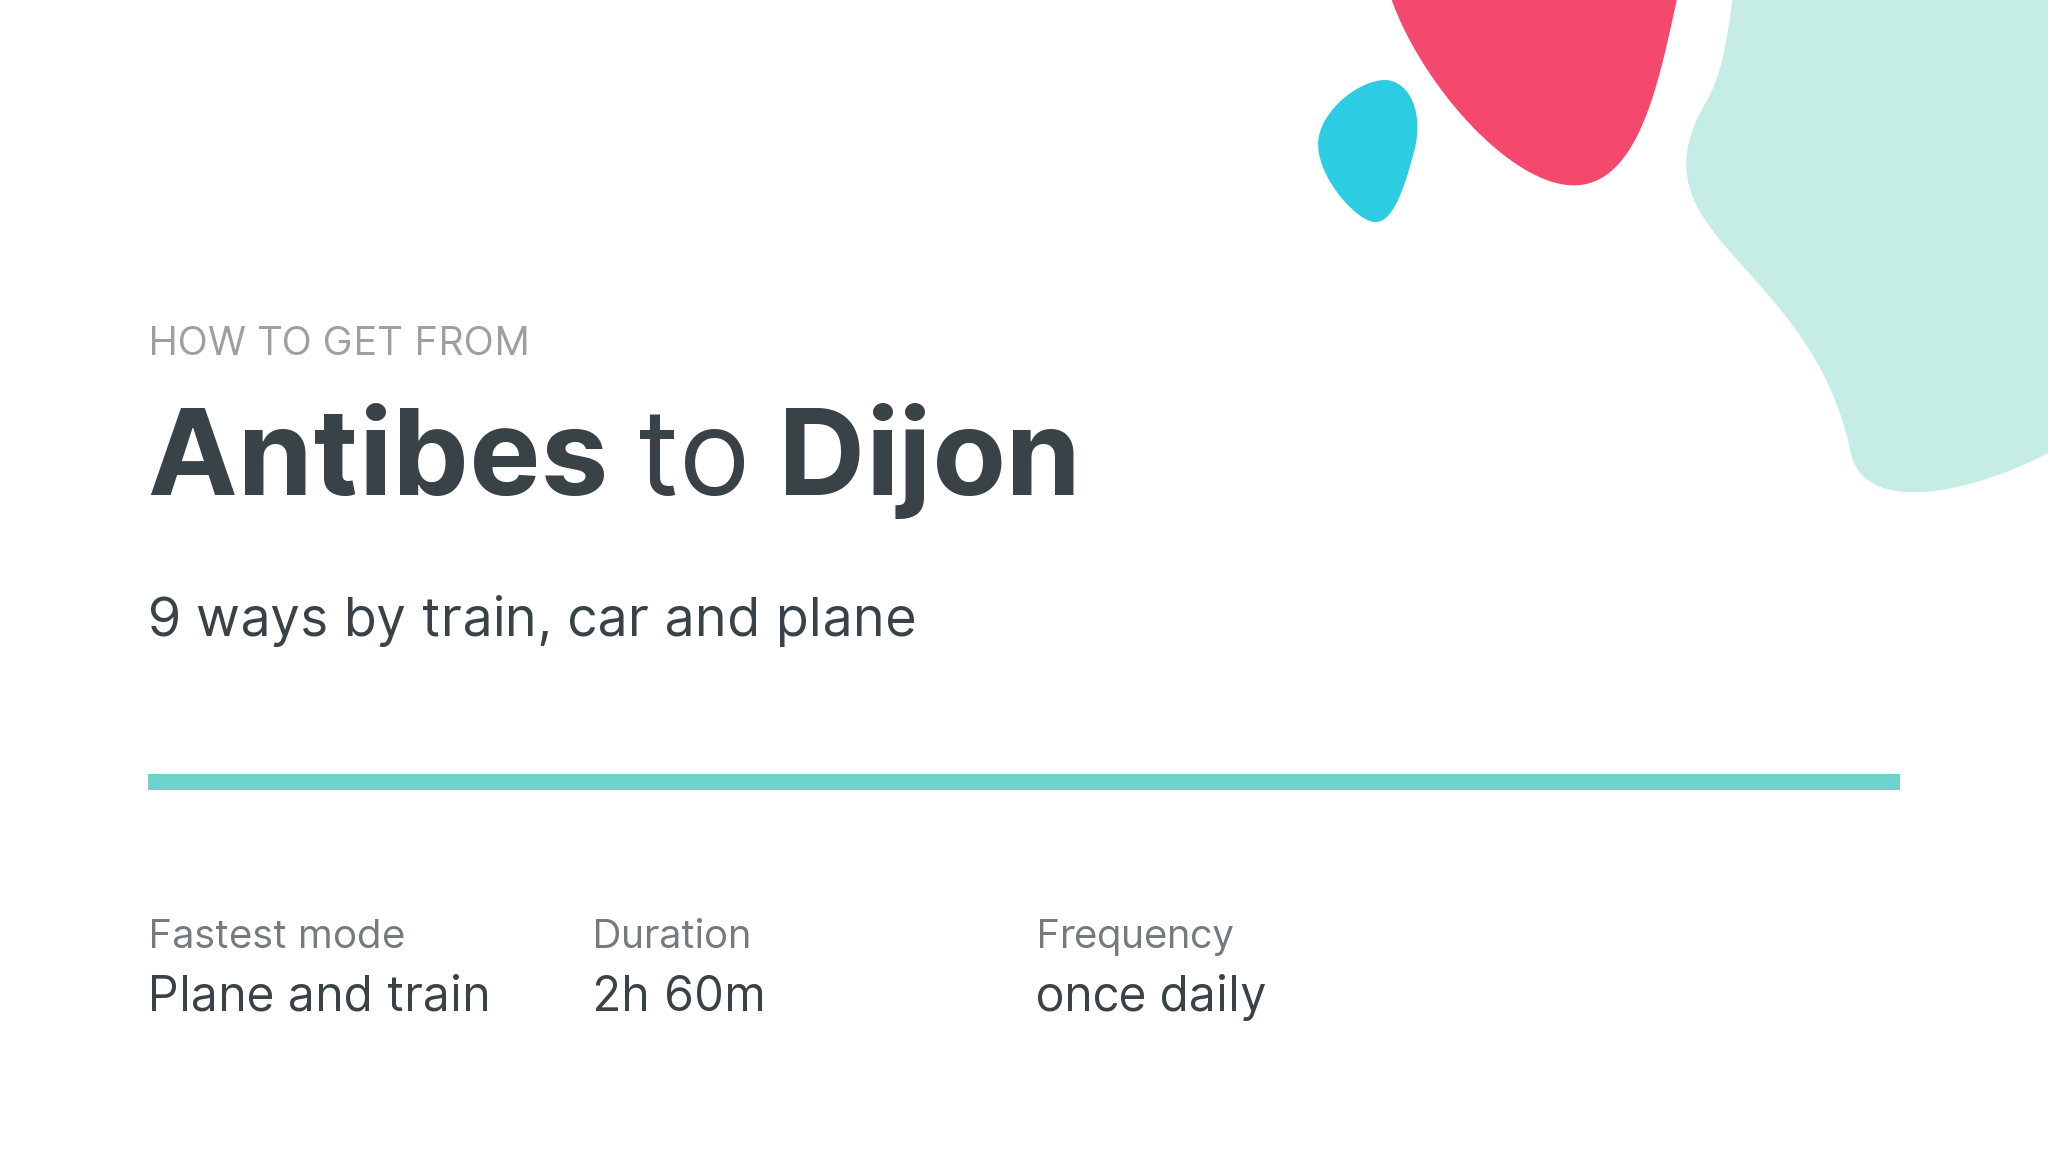 How do I get from Antibes to Dijon